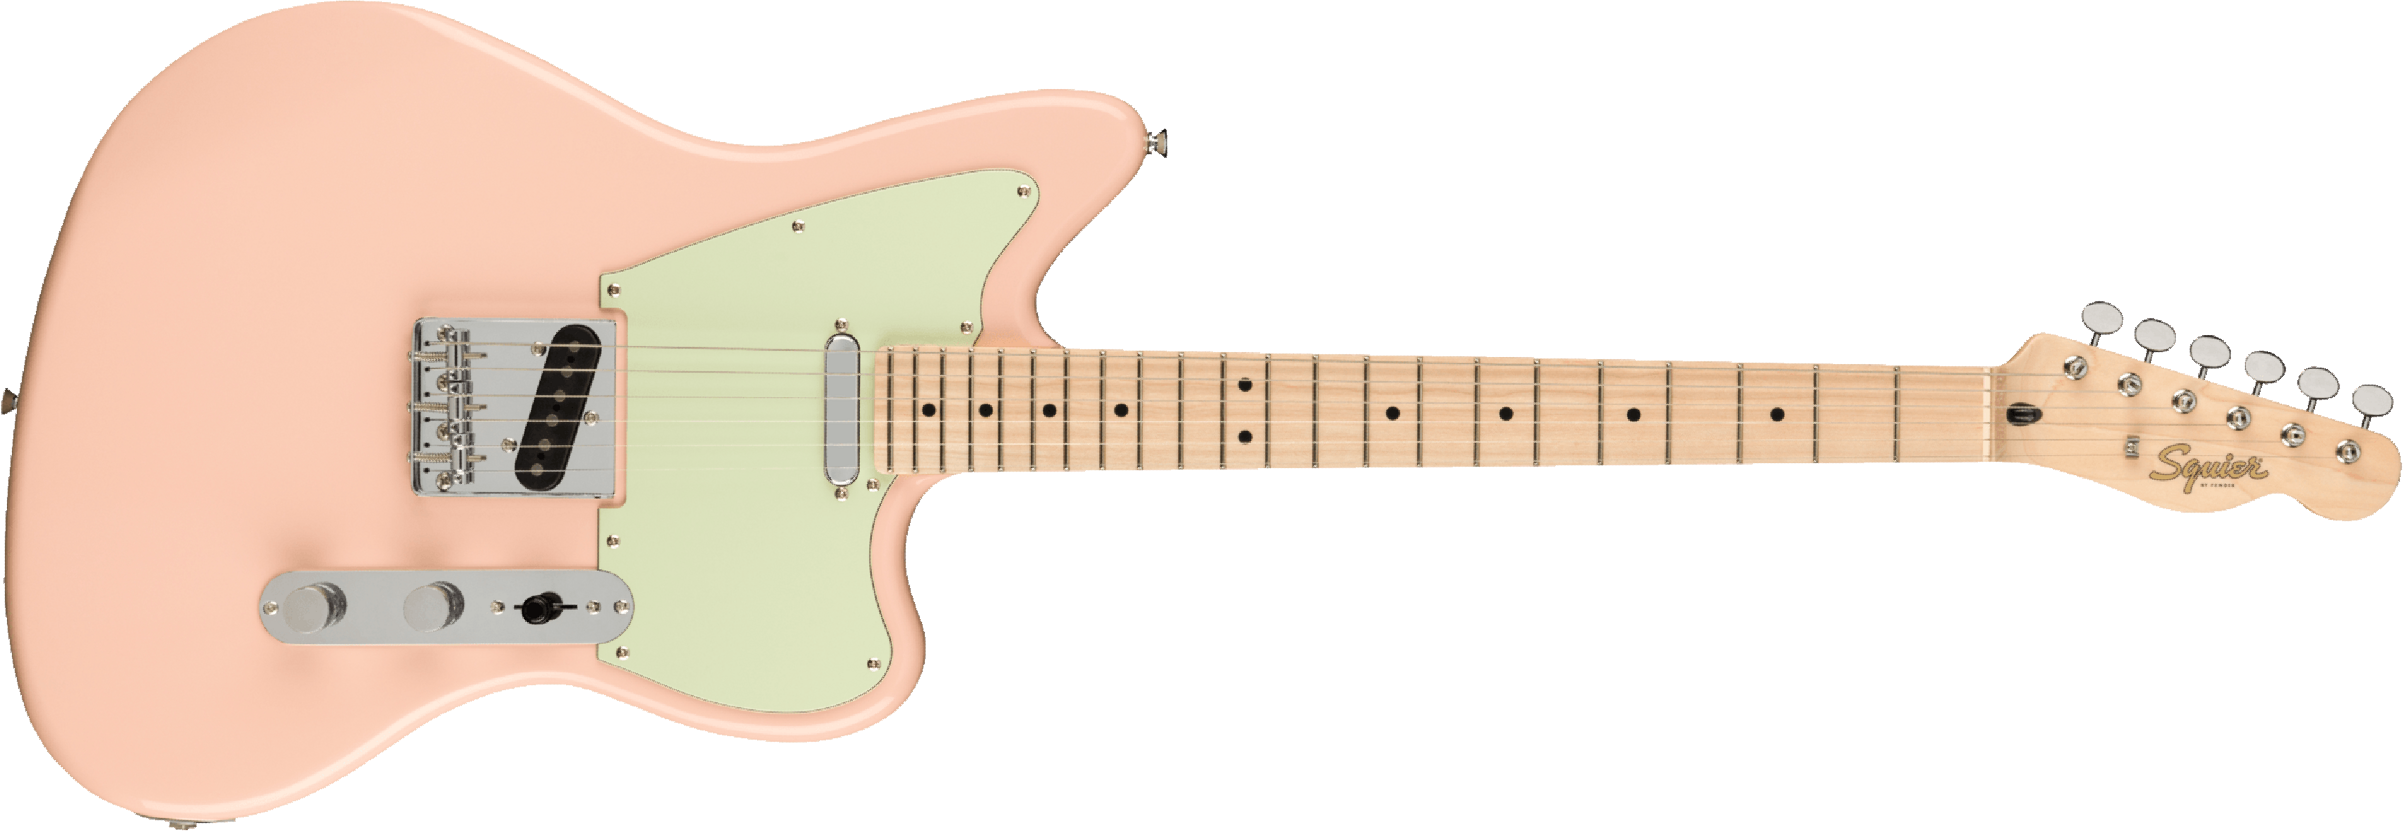 Squier Tele Offset Paranormal Ss Ht Mn - Shell Pink - Retro-Rock-E-Gitarre - Main picture